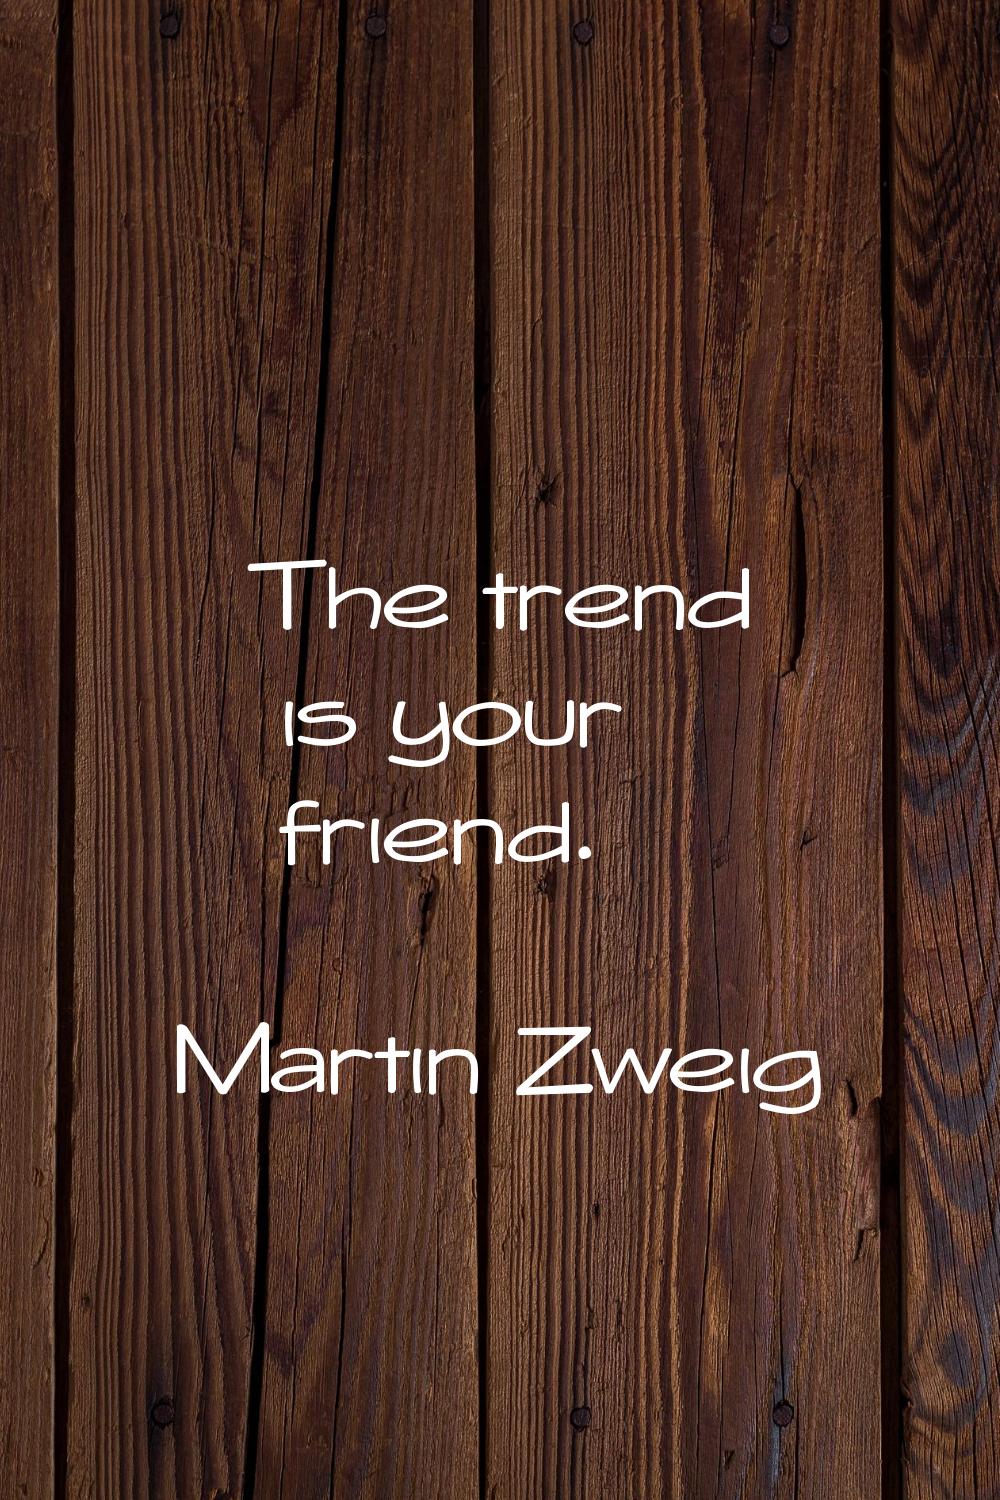 The trend is your friend.